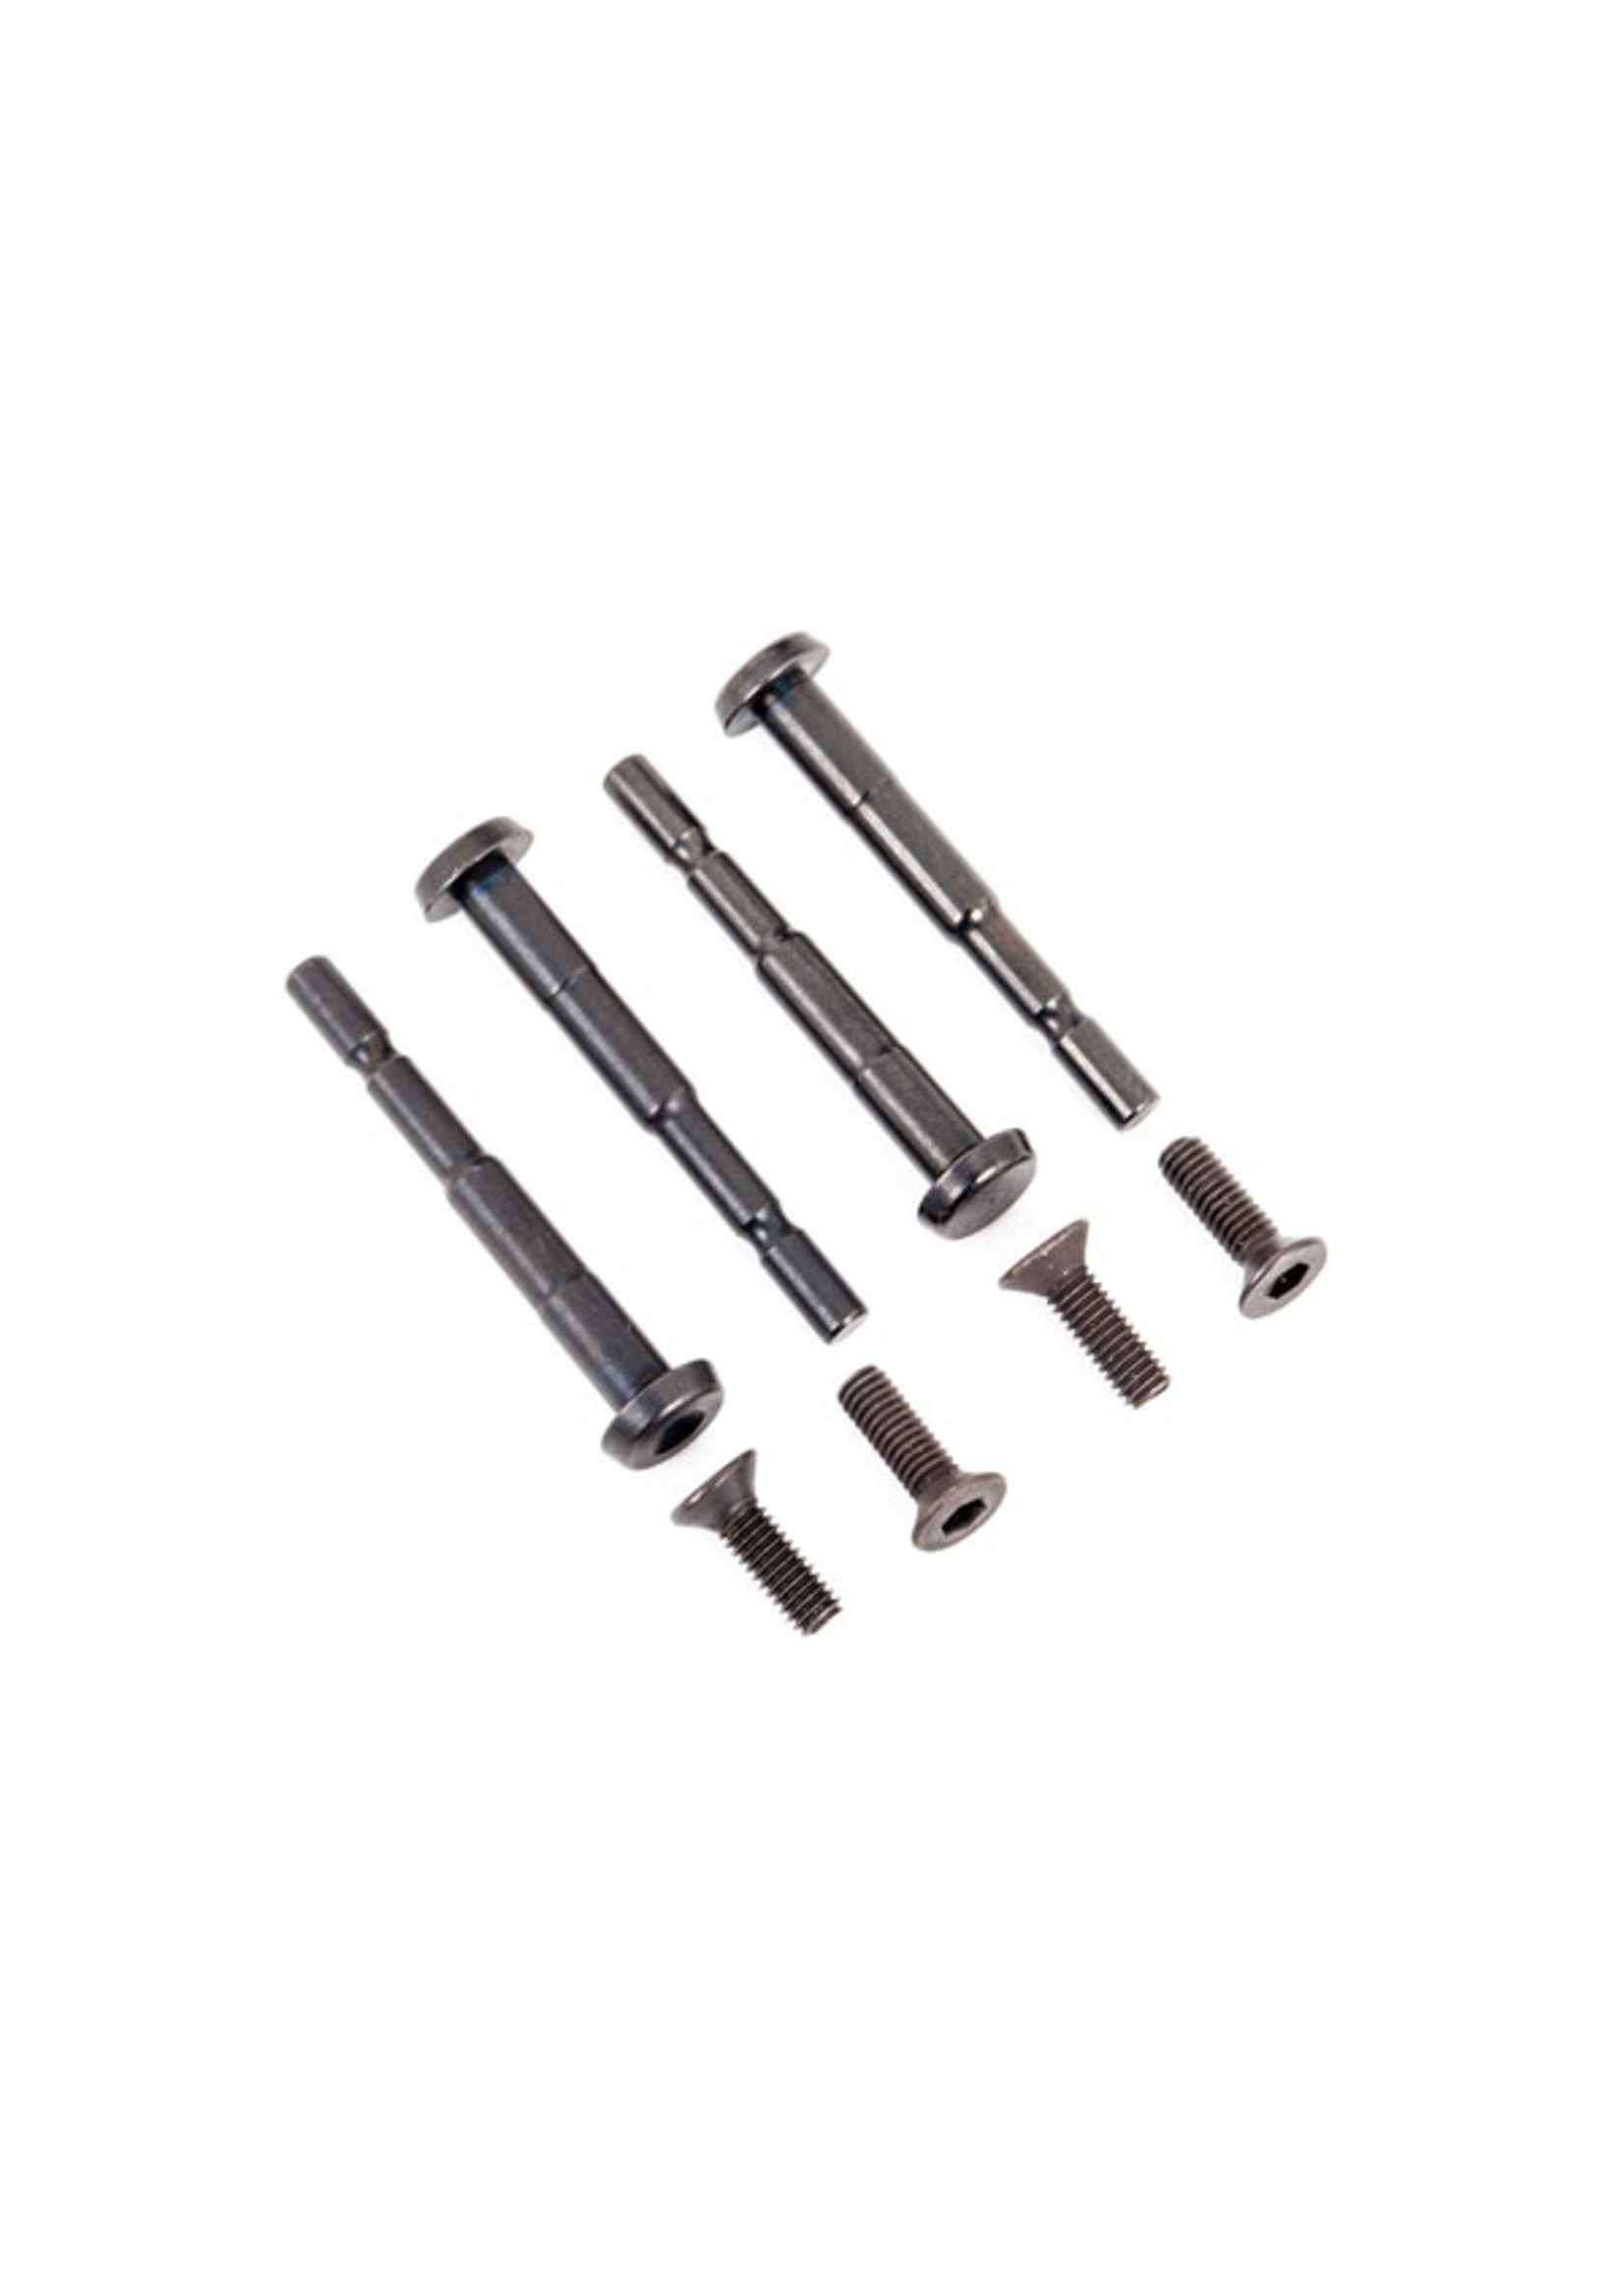 Traxxas 9663 - Hardened Shock Pins - Front & Rear